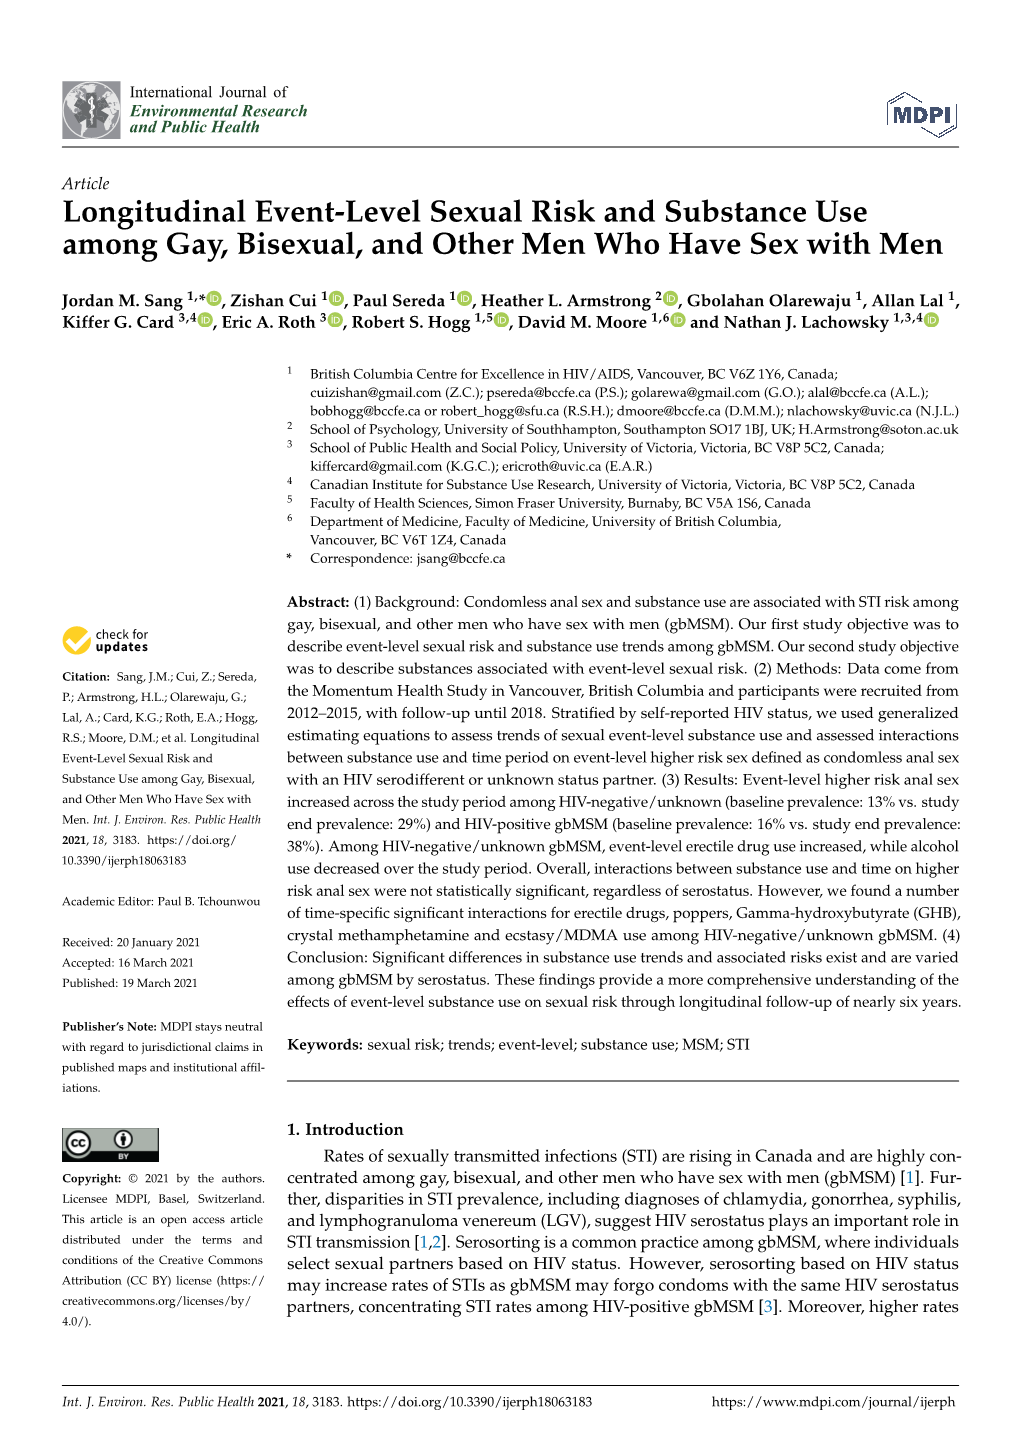 Longitudinal Event-Level Sexual Risk and Substance Use Among Gay, Bisexual, and Other Men Who Have Sex with Men